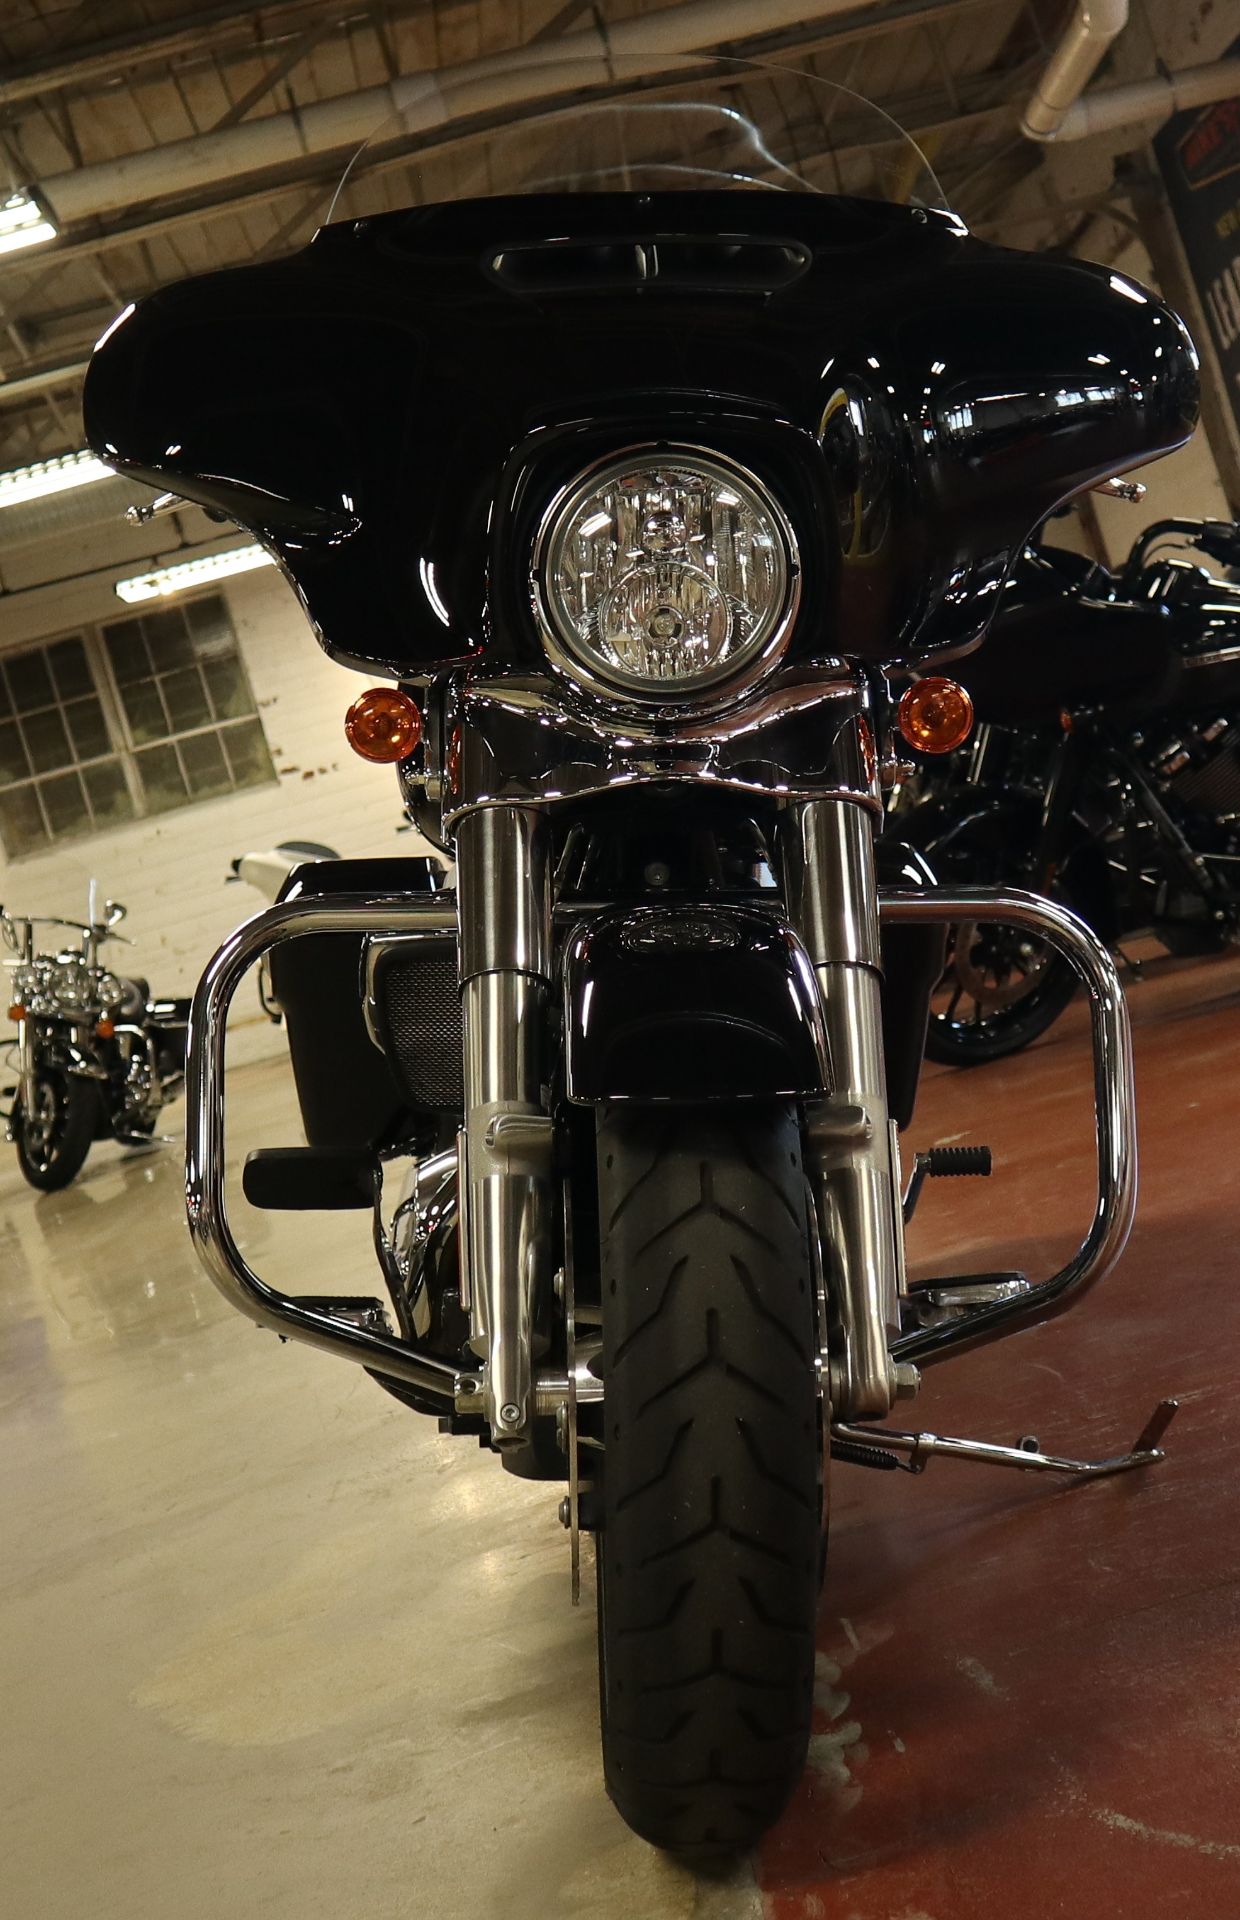 2021 Harley-Davidson Electra Glide® Standard in New London, Connecticut - Photo 3